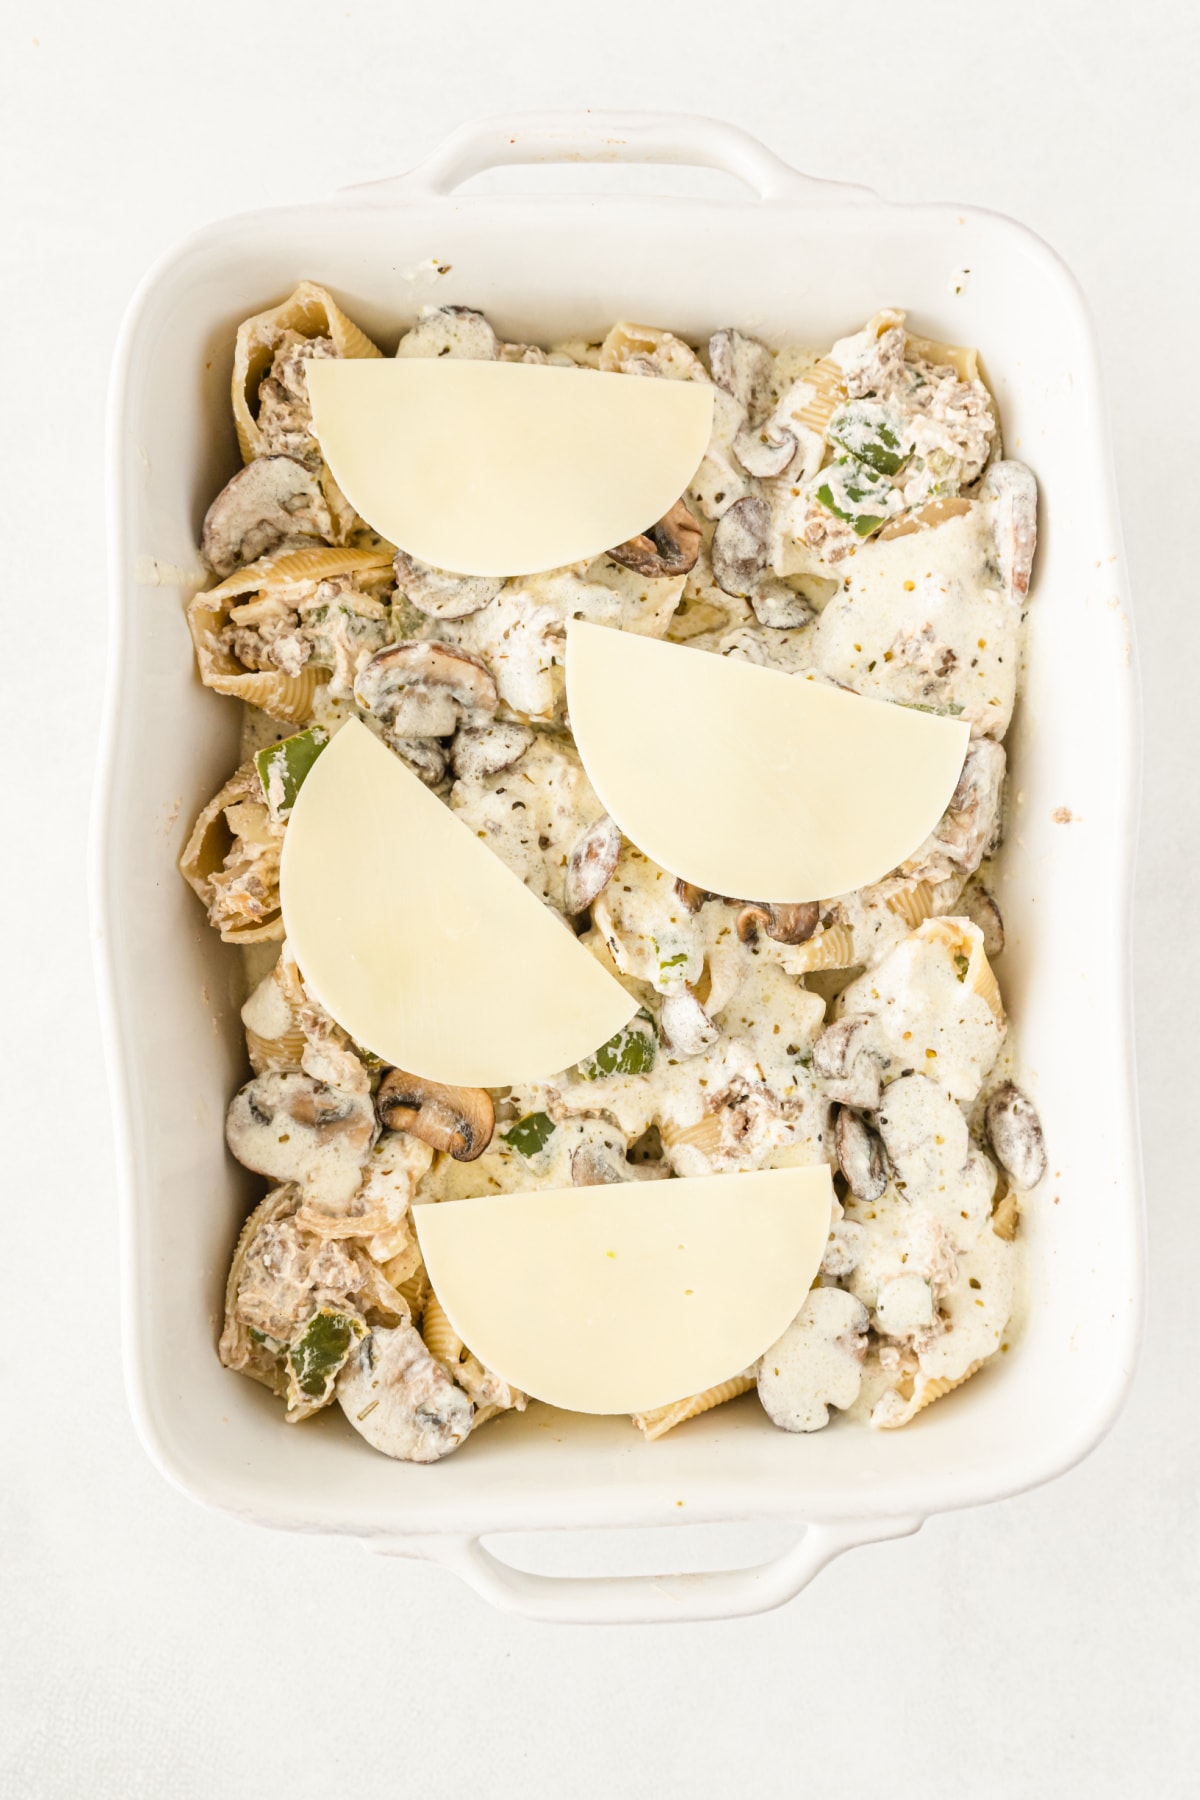 Provolone cheese over stuffed shells